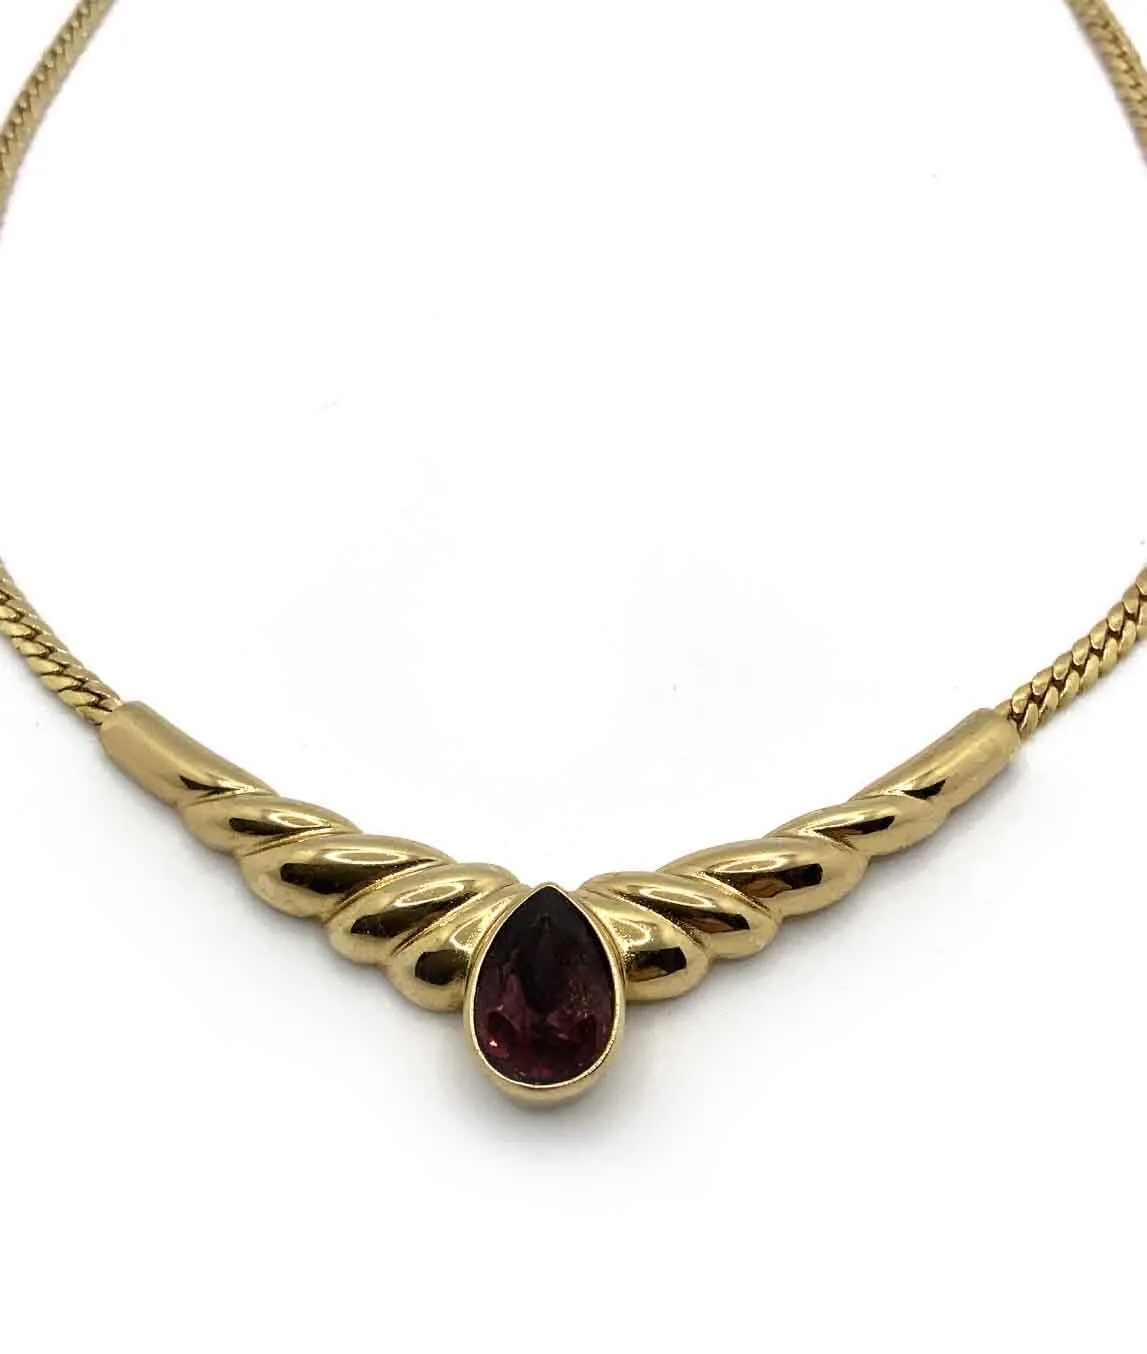 Purple and gold vintage Christian Dior choker necklace